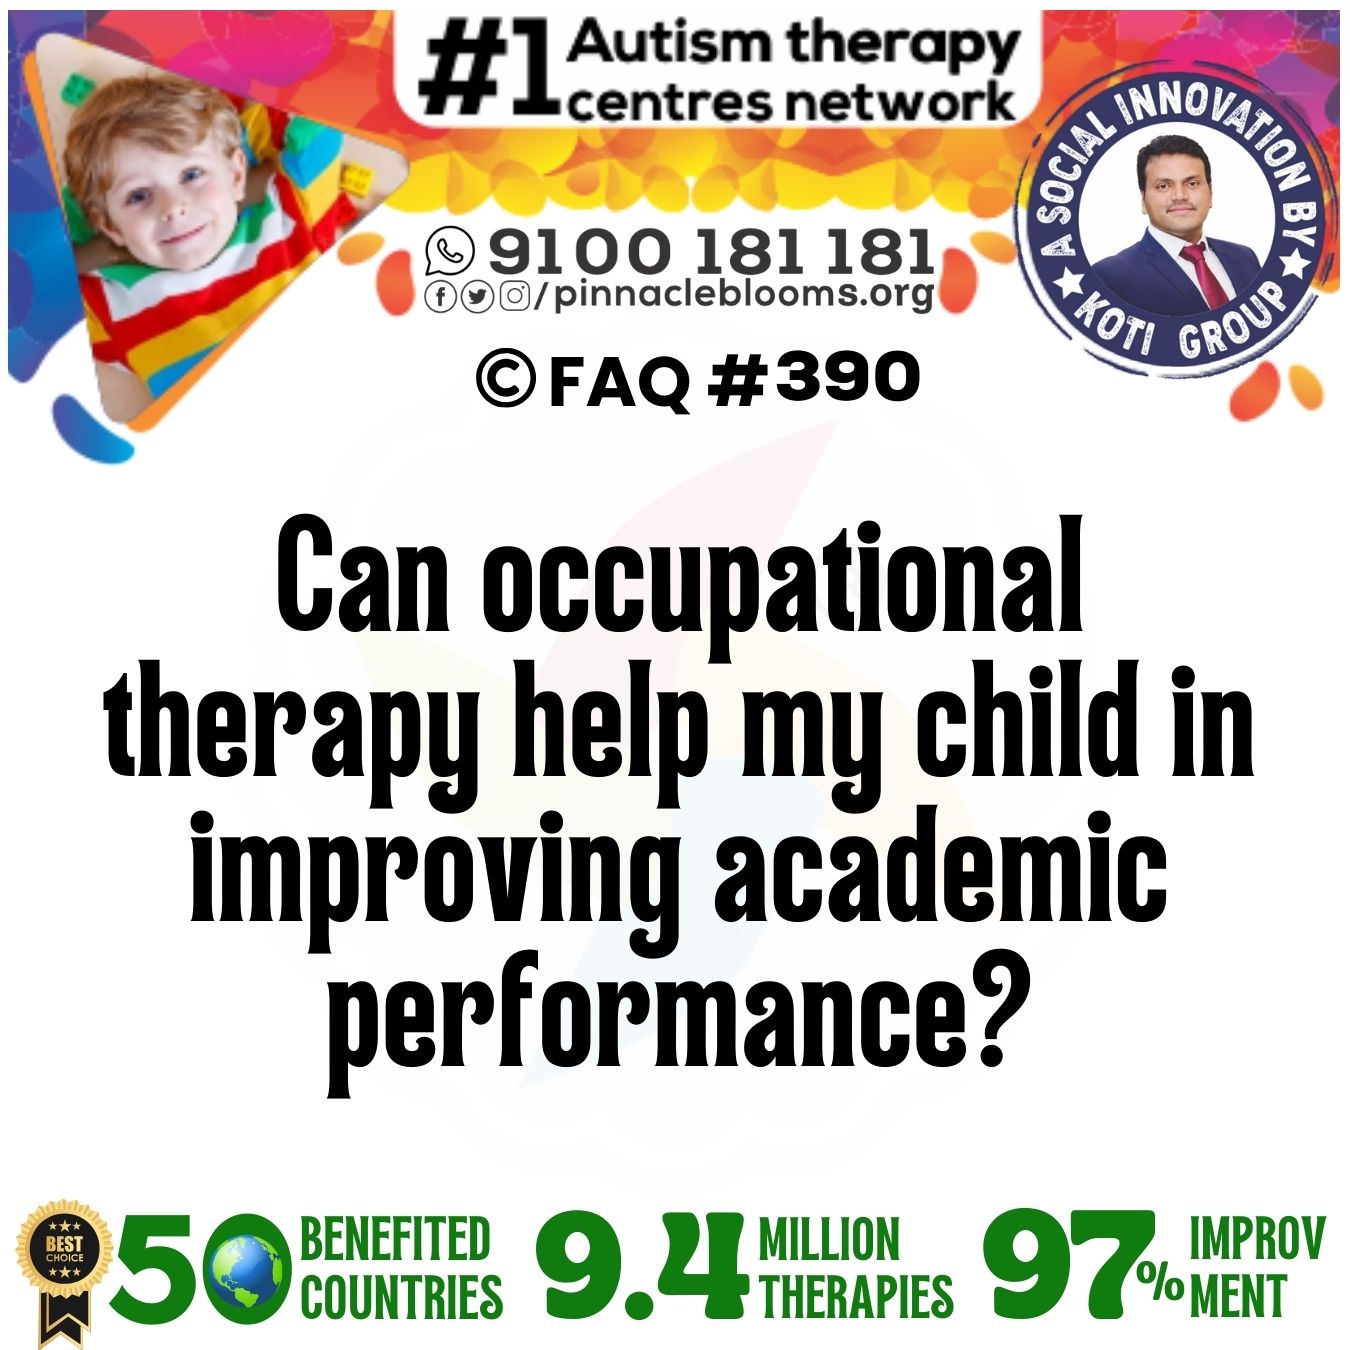 Can occupational therapy help my child in improving academic performance?